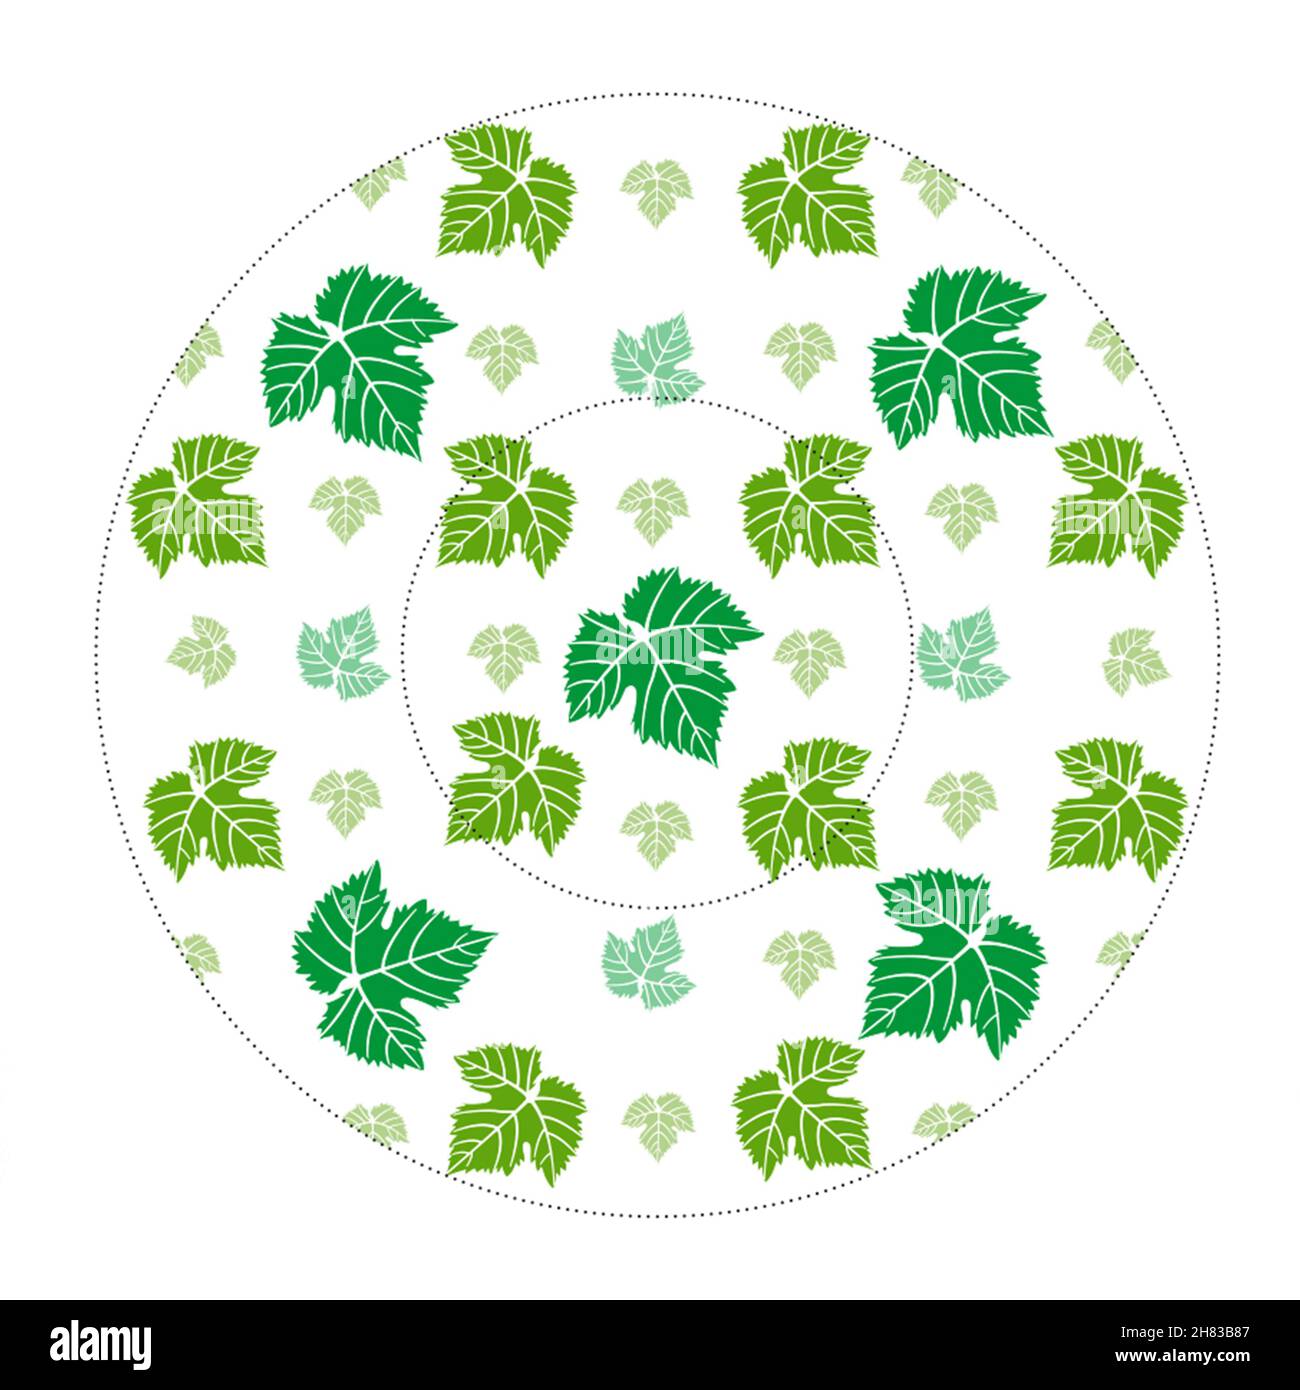 Plate with green leaves pattern for decoration purposes isolated over white background, illustration. Textured round icon, circle muffins or cupcakes Stock Photo